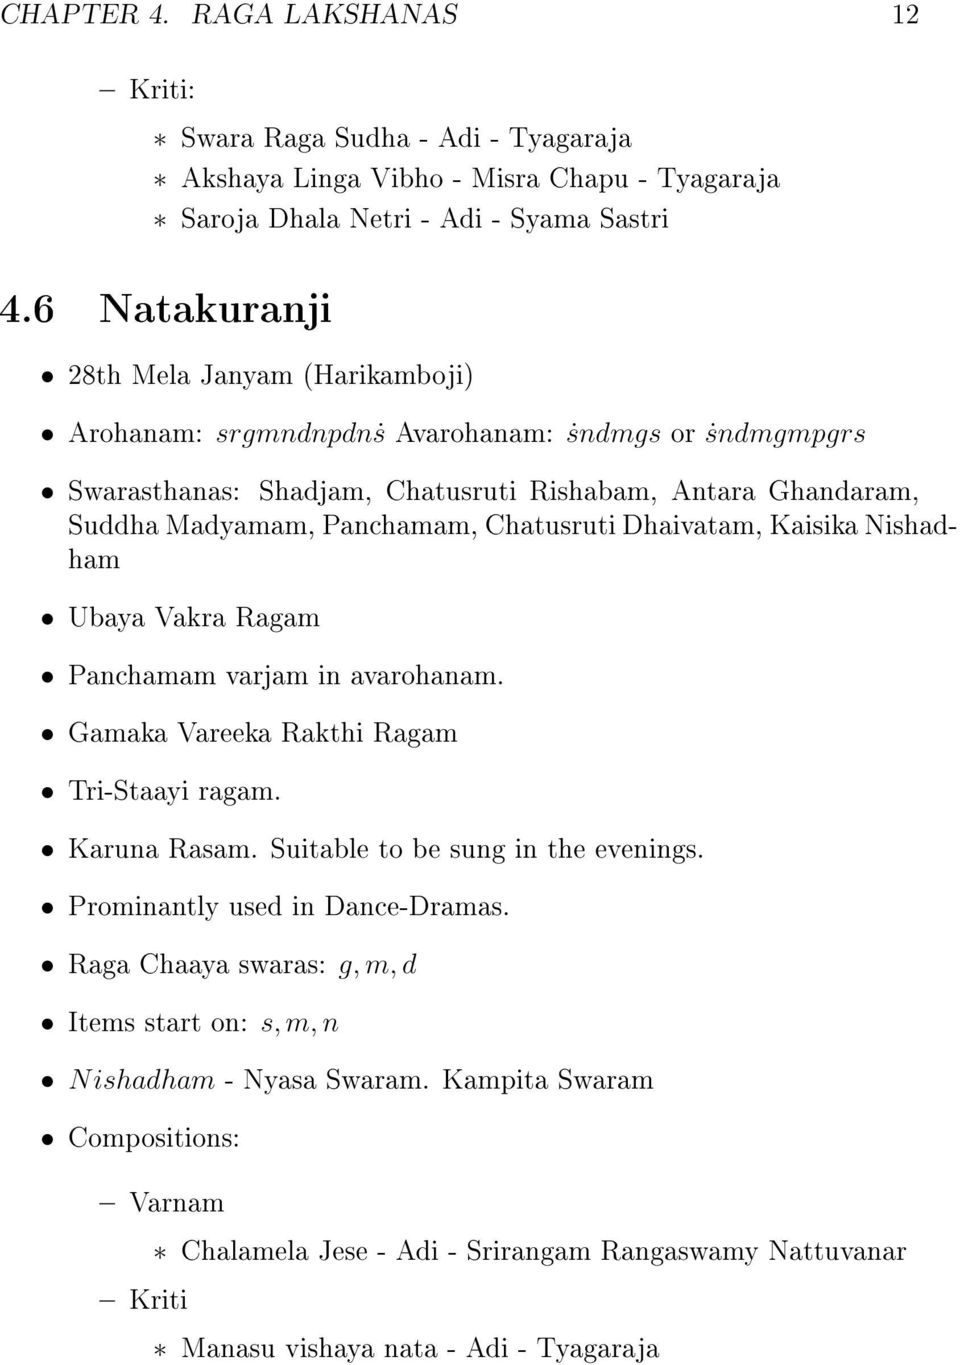 Carnatic Music Theory Second Year 12 Pdf Free Download Krithis are also introduced in this course. carnatic music theory second year 12